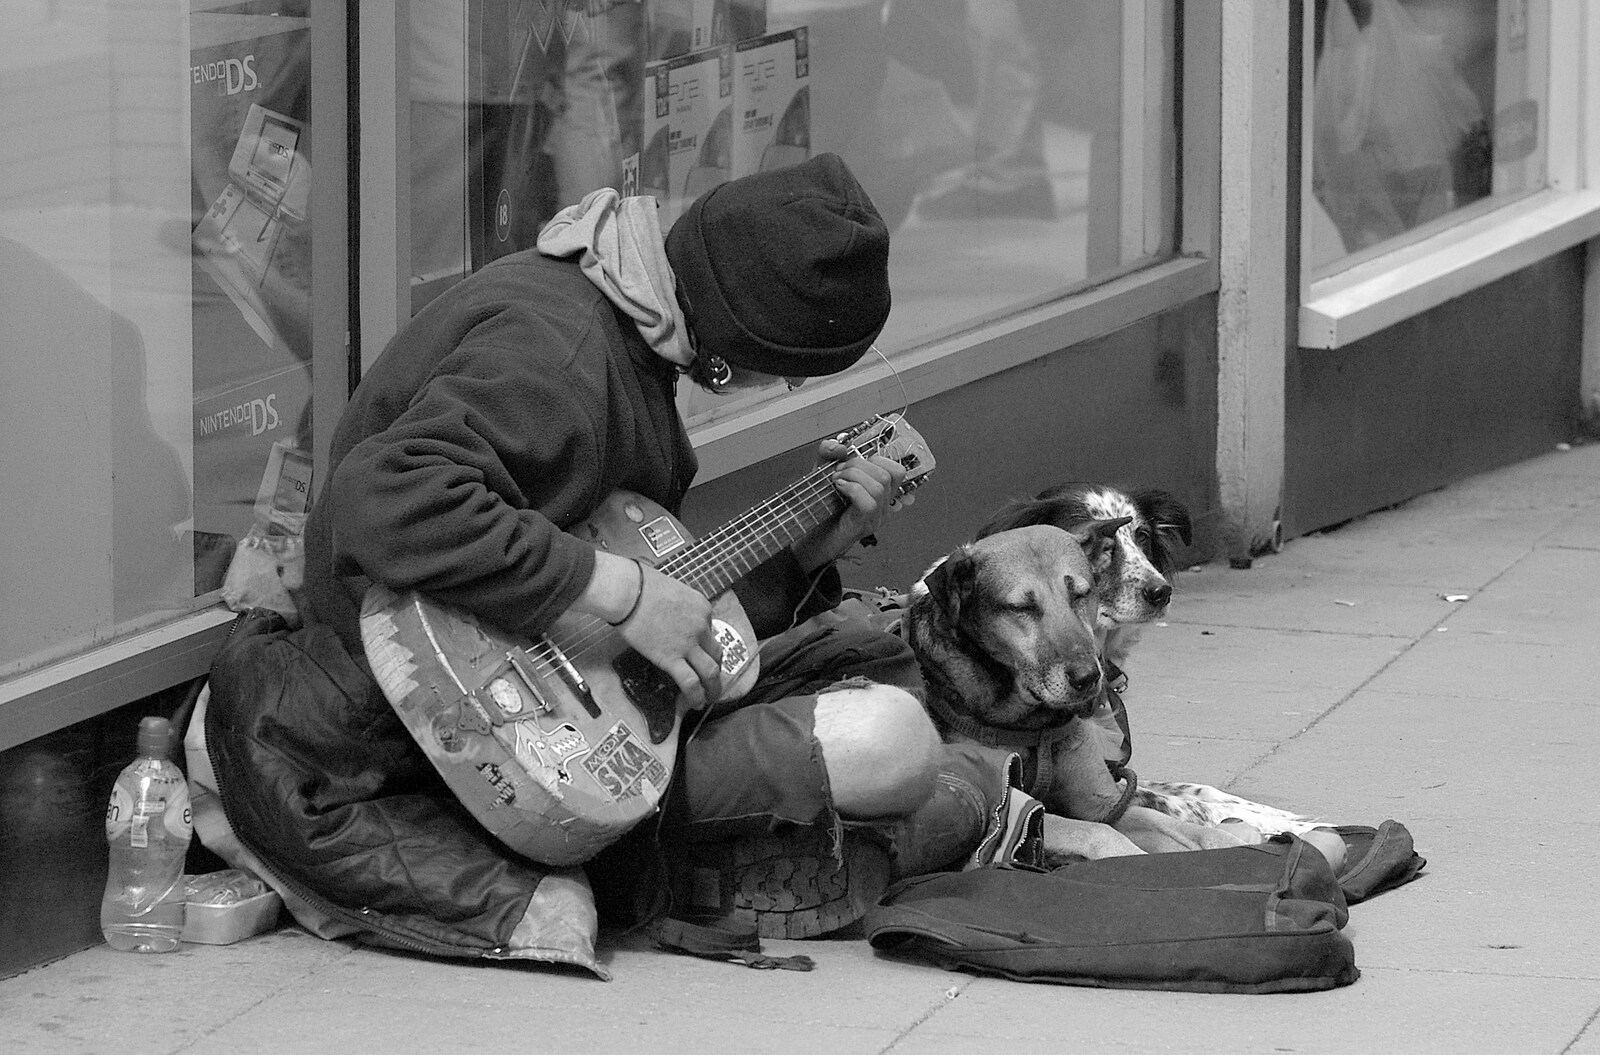 A busker and his dog, outside Castle Mall in Norwich from Norwich Market, the BSCC at Occold, and Diss Publishing - 10th April 2005